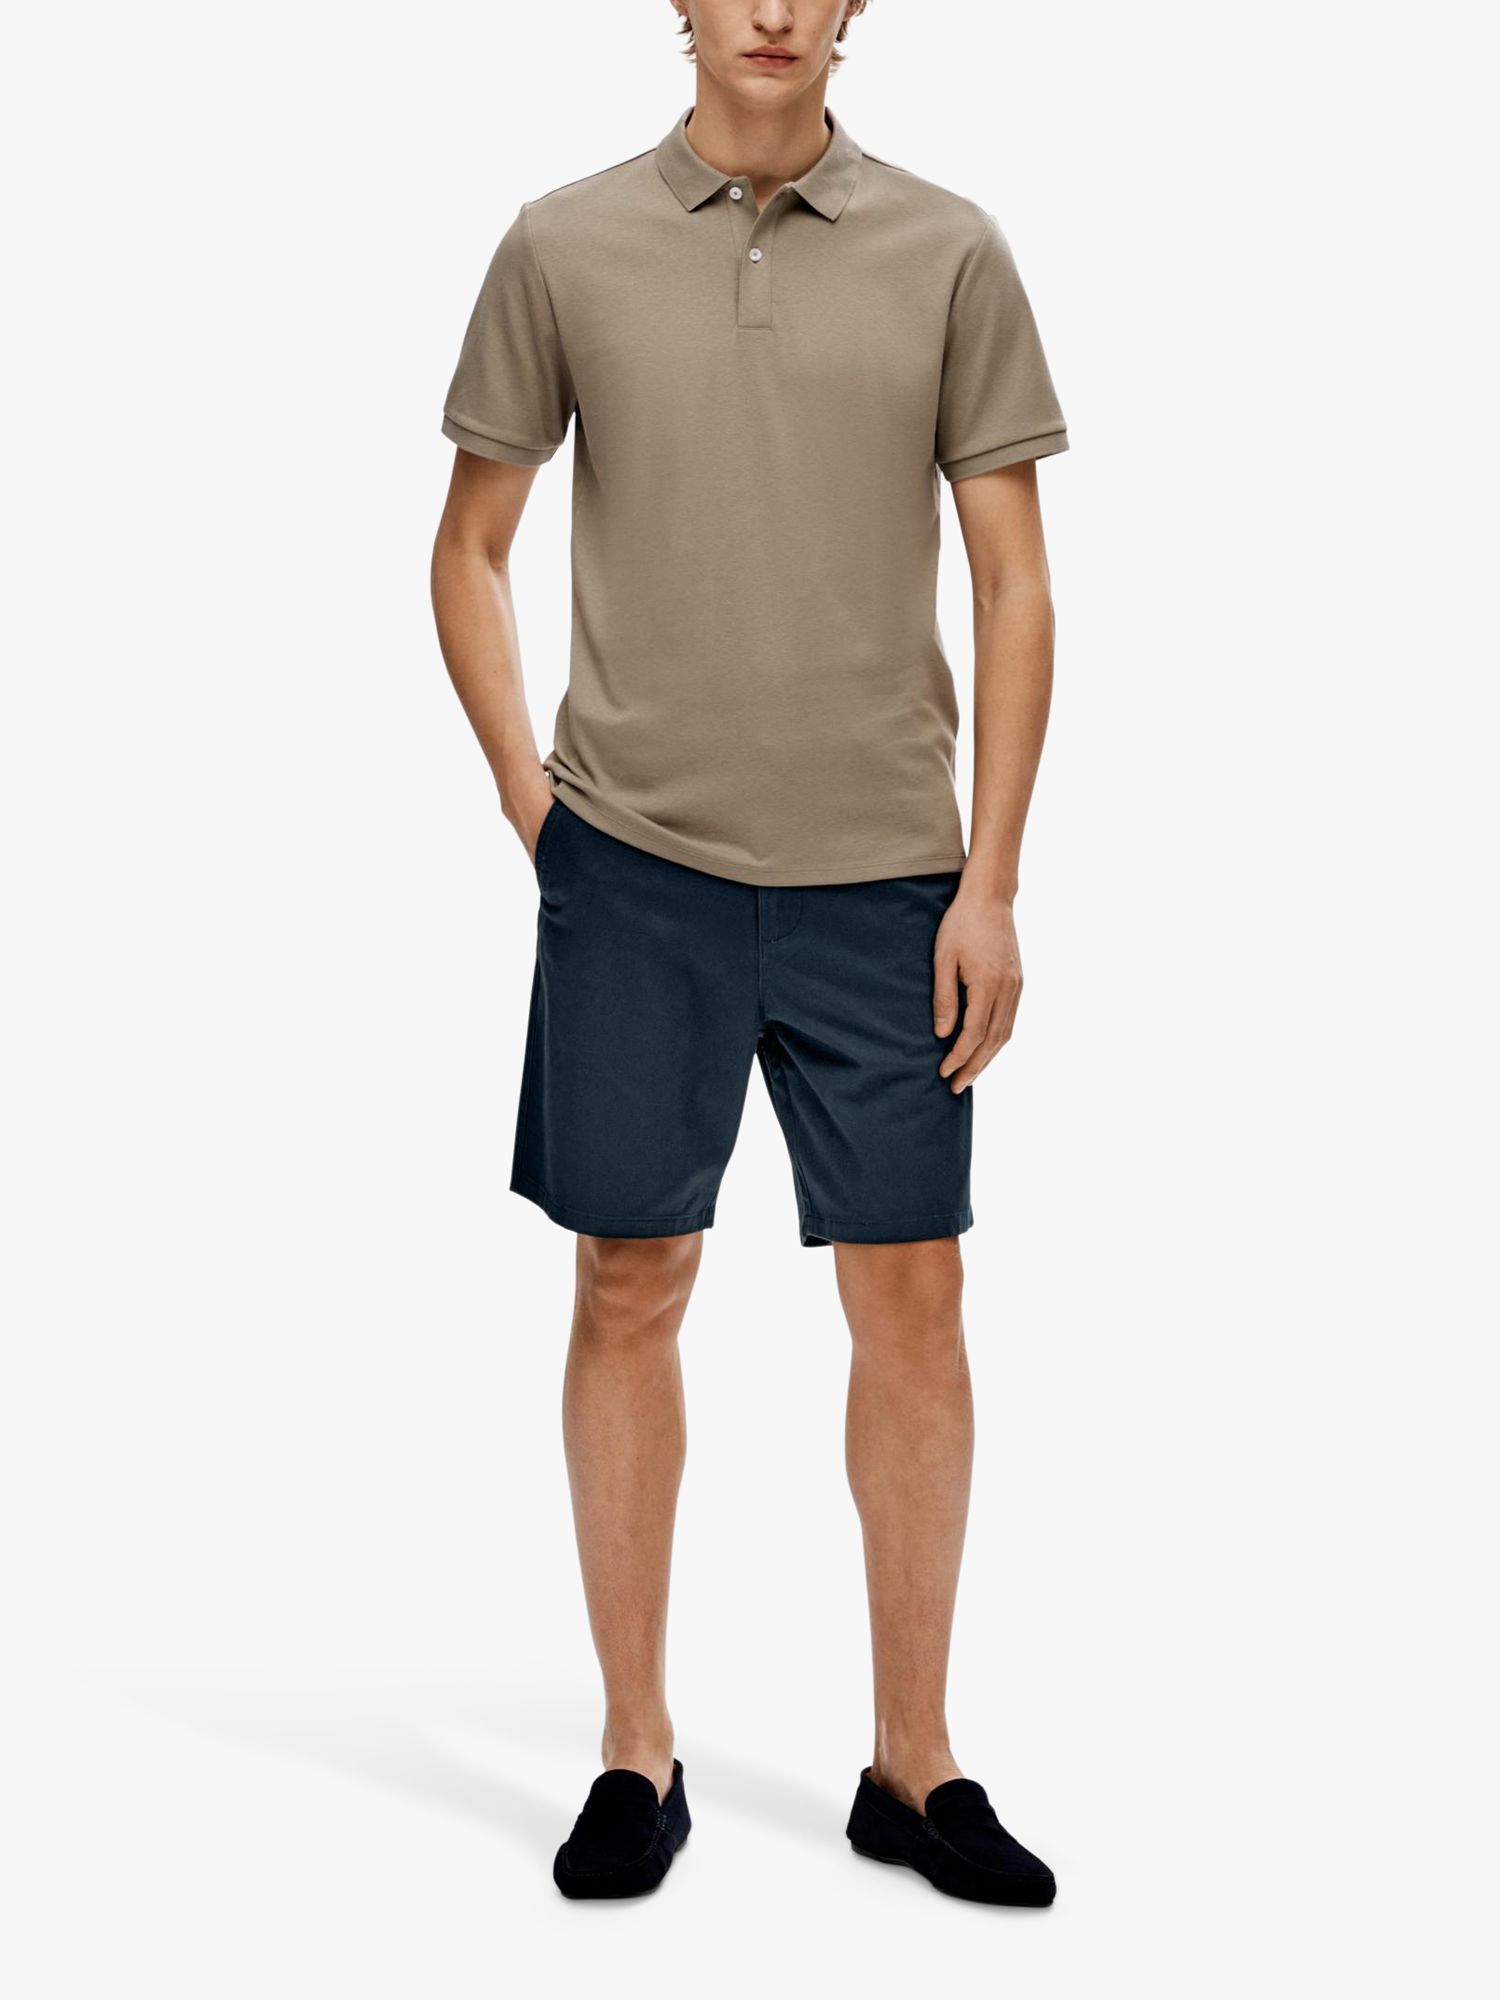 SELECTED HOMME Bill Chino Shorts, Dark Sapphire, S